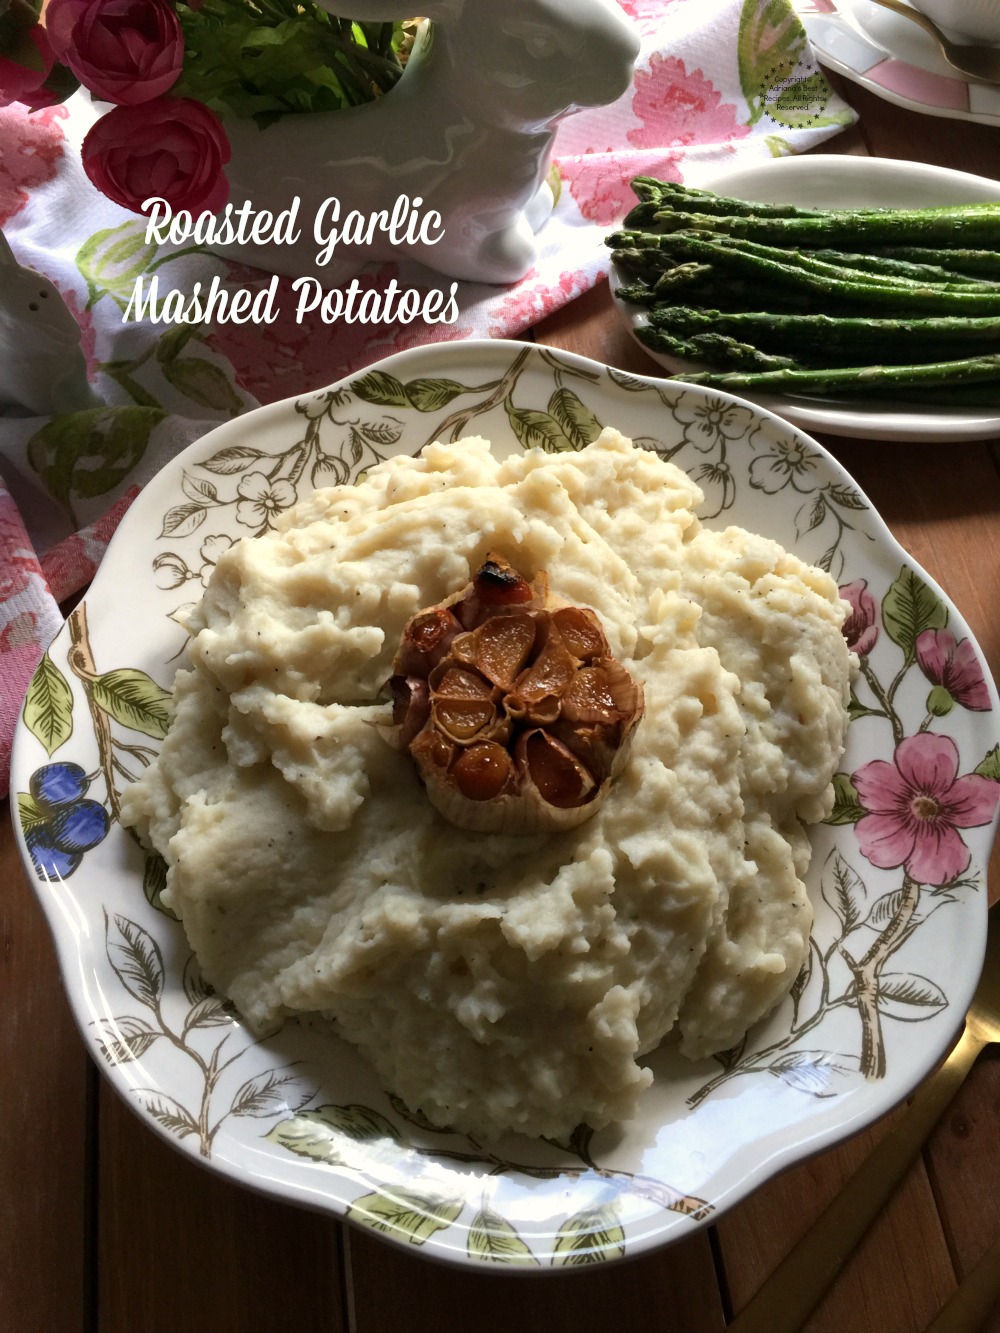 Roasted garlic mashed potatoes ready in just few minutes